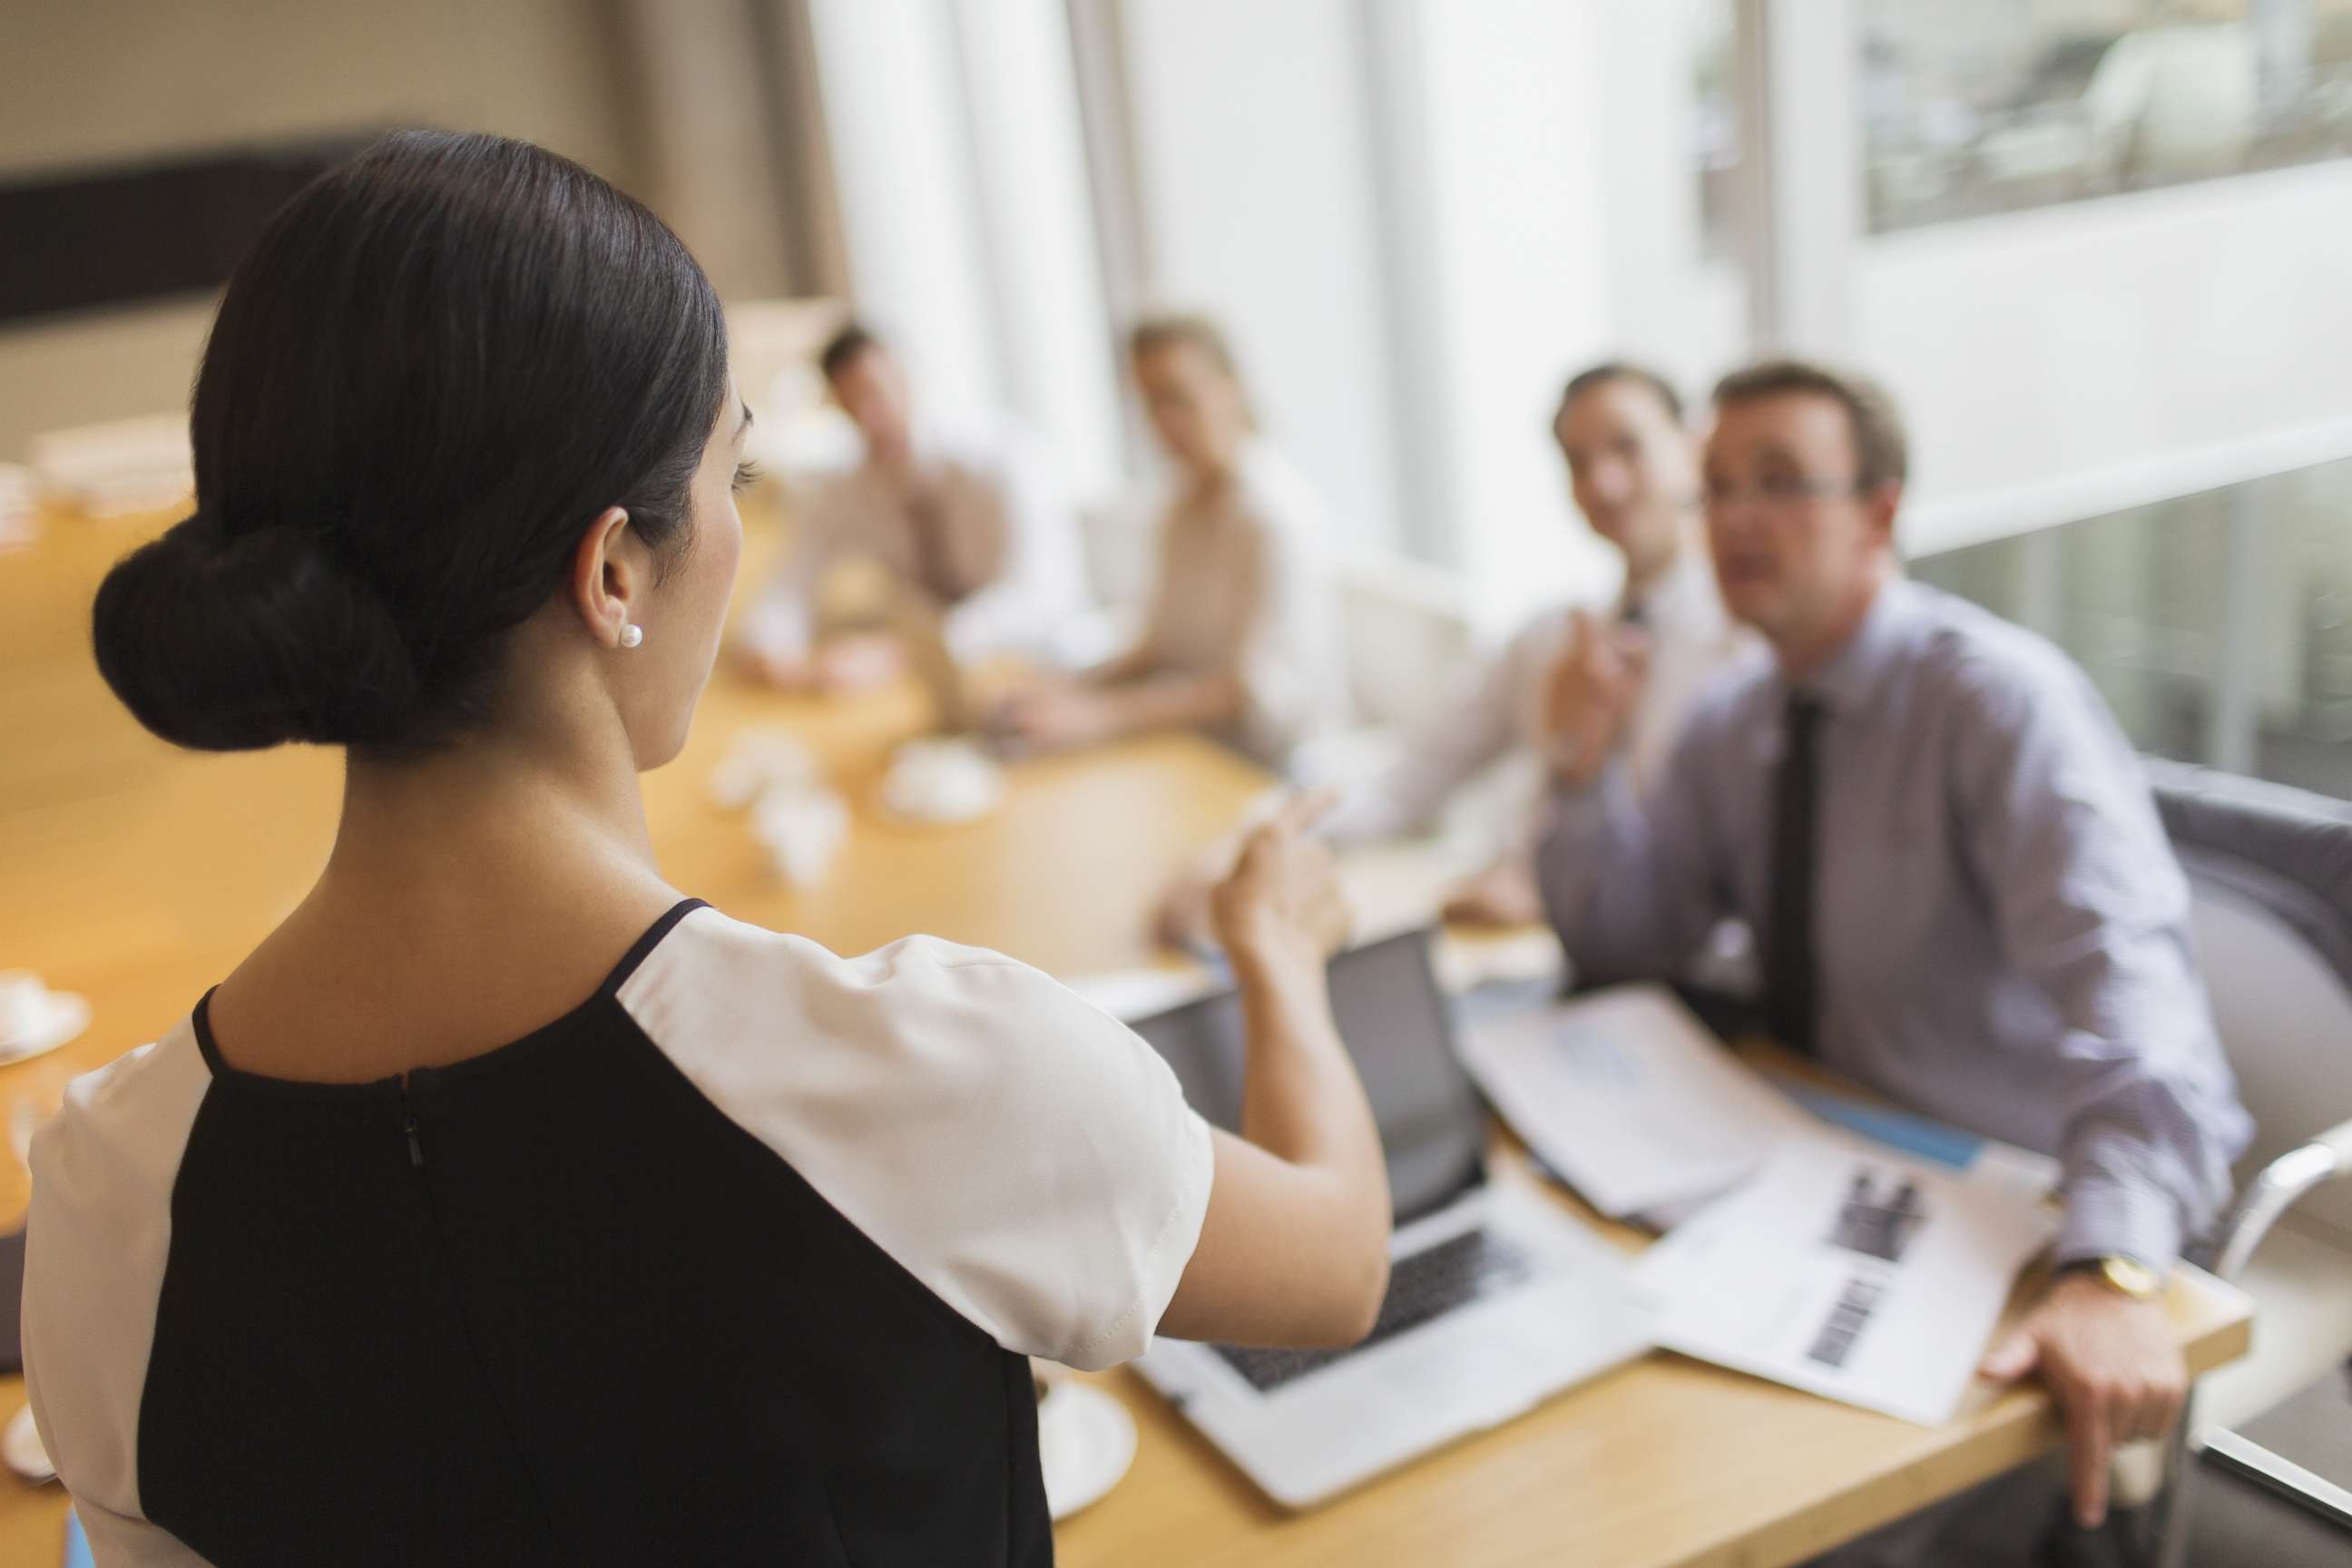 PHOTO: In this undated stock photo, a woman leads a meeting in a conference.